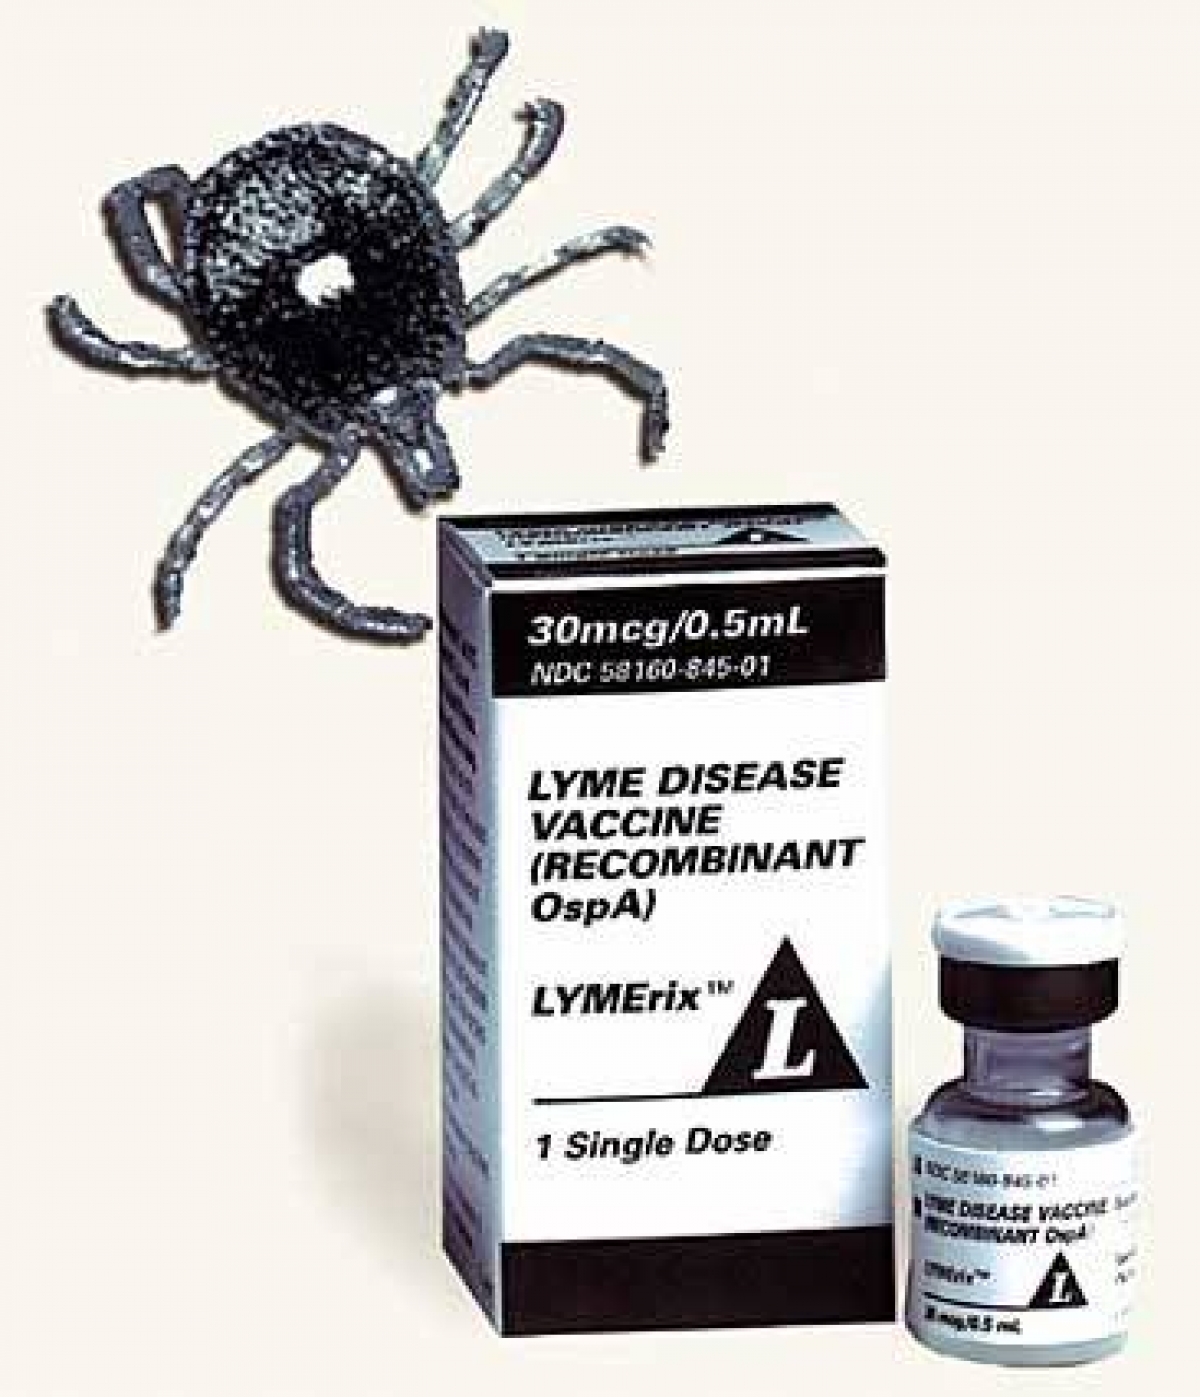 The Lyme vaccine: a cautionary tale